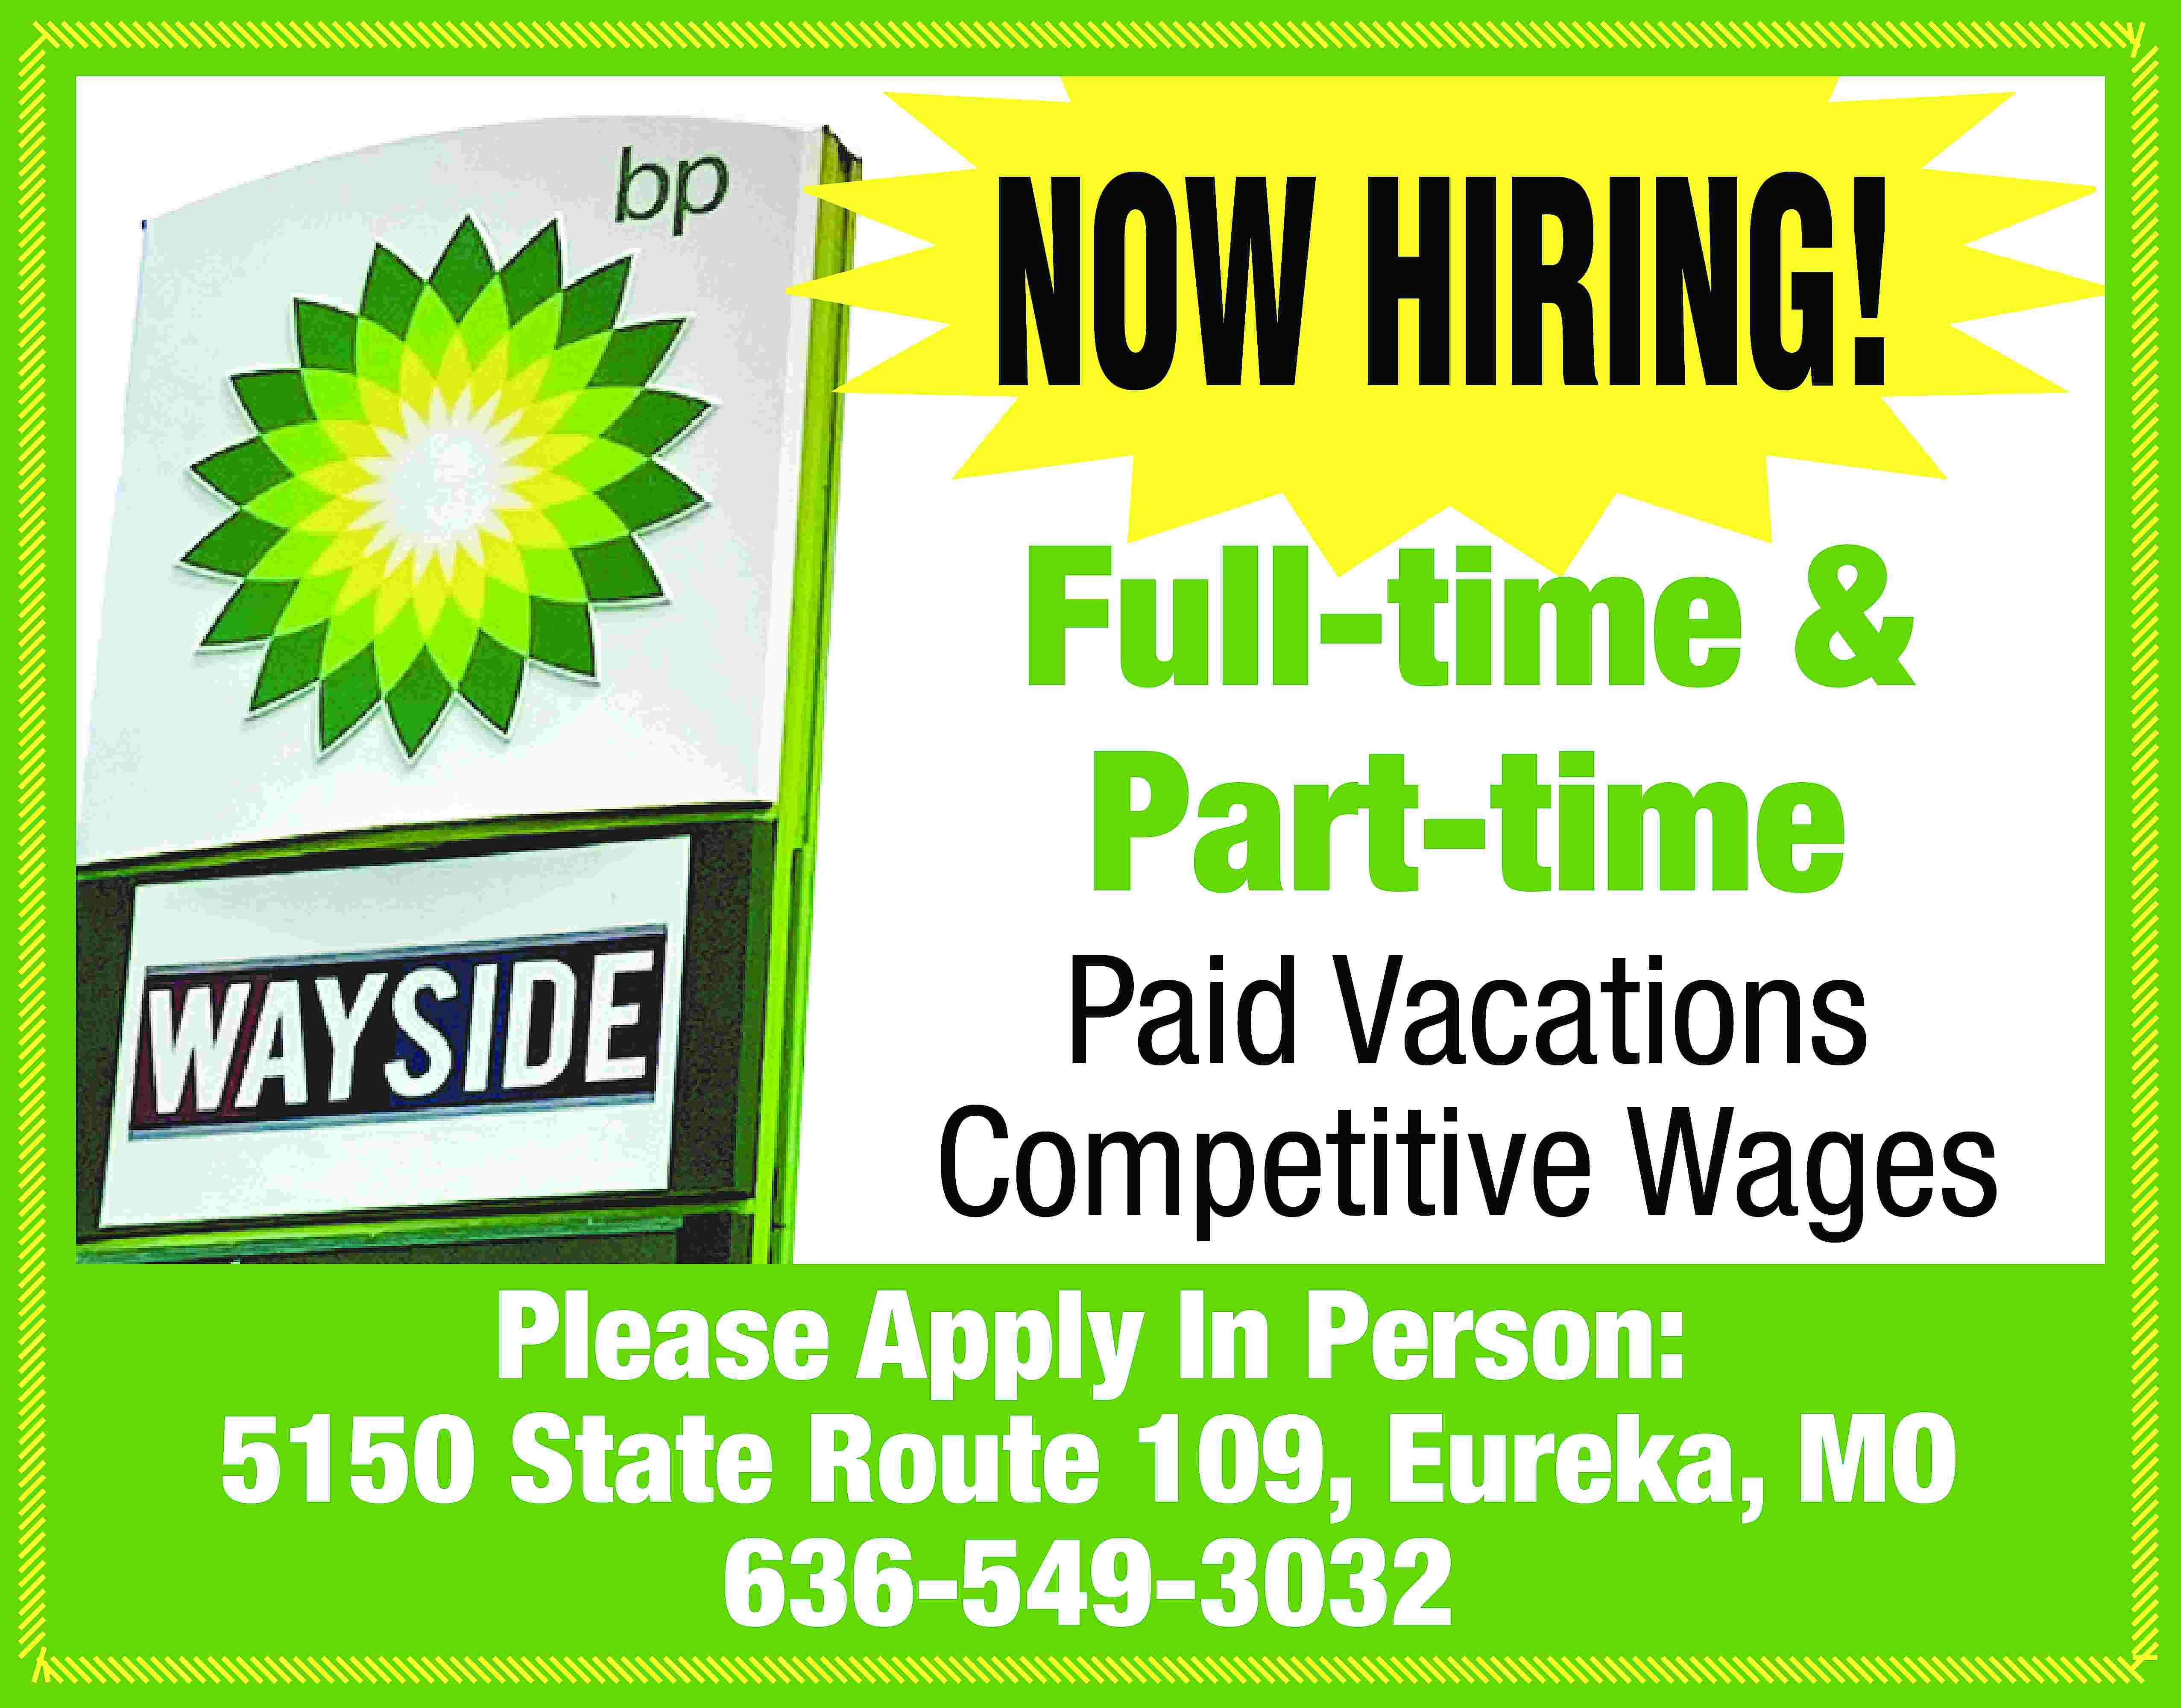 NOW HIRING! Full-time & Part-time  NOW HIRING! Full-time & Part-time Paid Vacations Competitive Wages Please Apply In Person: 5150 State Route 109, Eureka, MO 636-549-3032